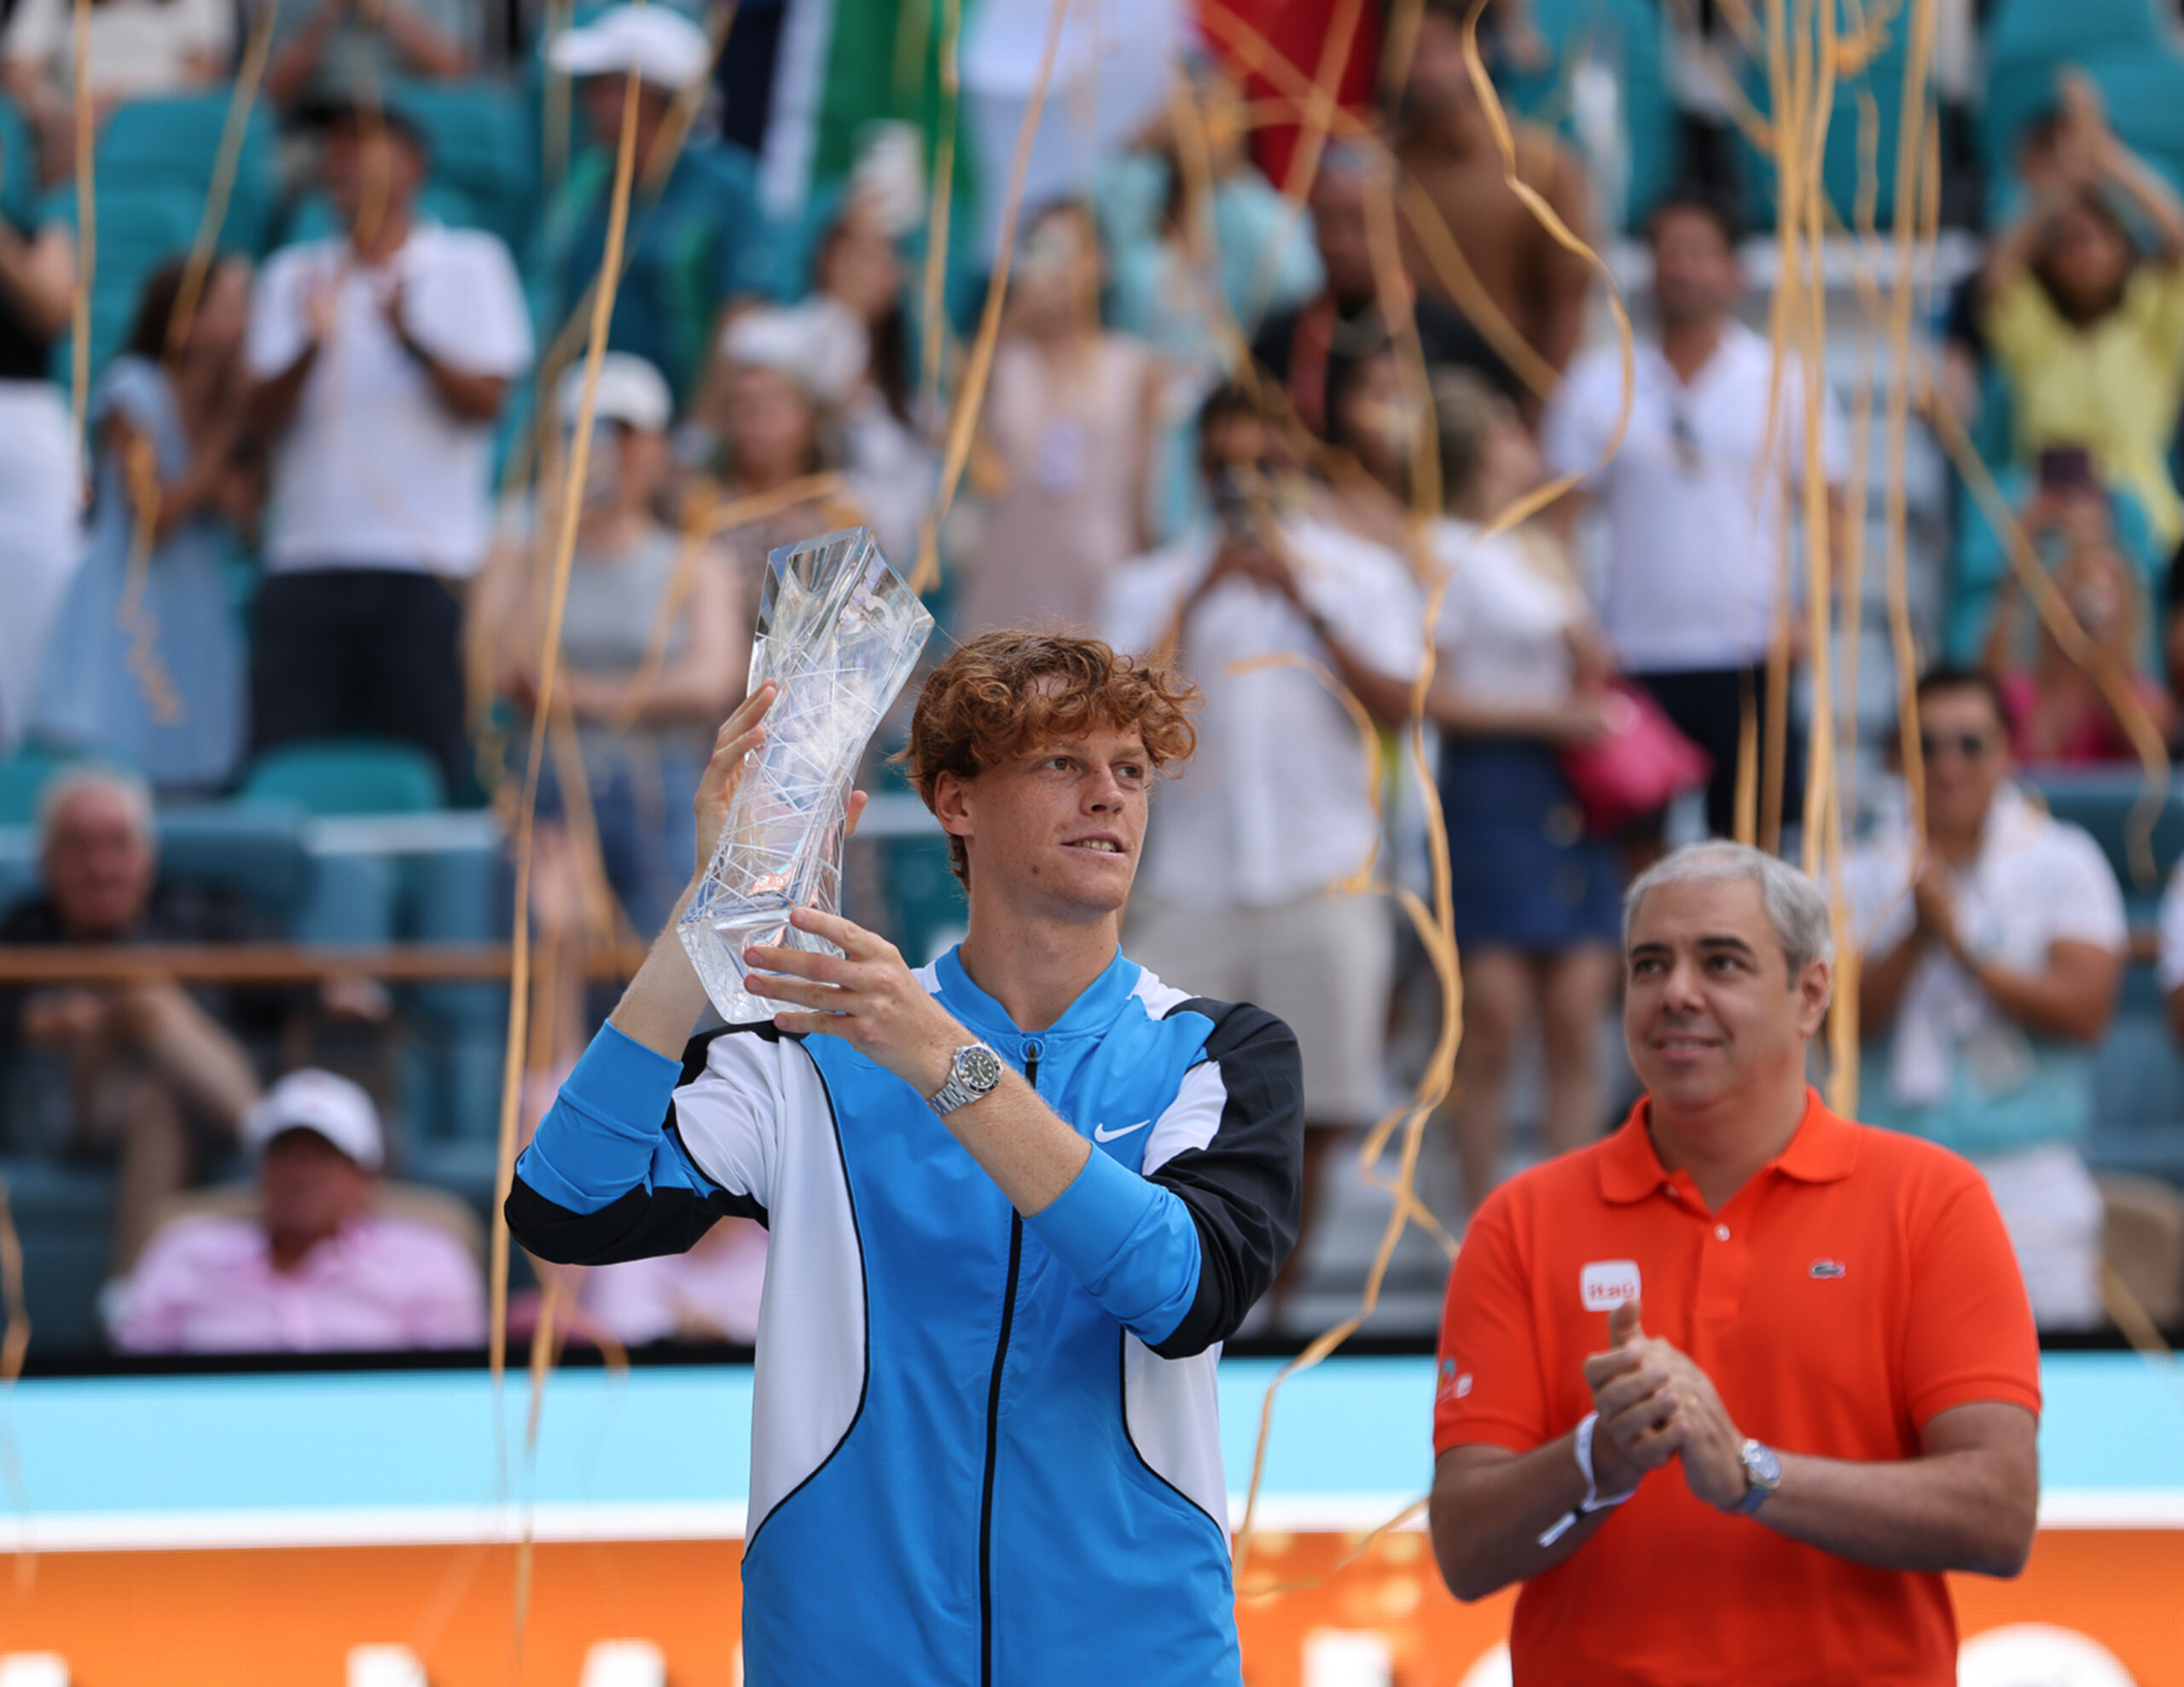 jannik-sinner-wins-his-first-miami-open-to-snatch-second-place-in-the-atp-ranking-from-carlos-alcaraz